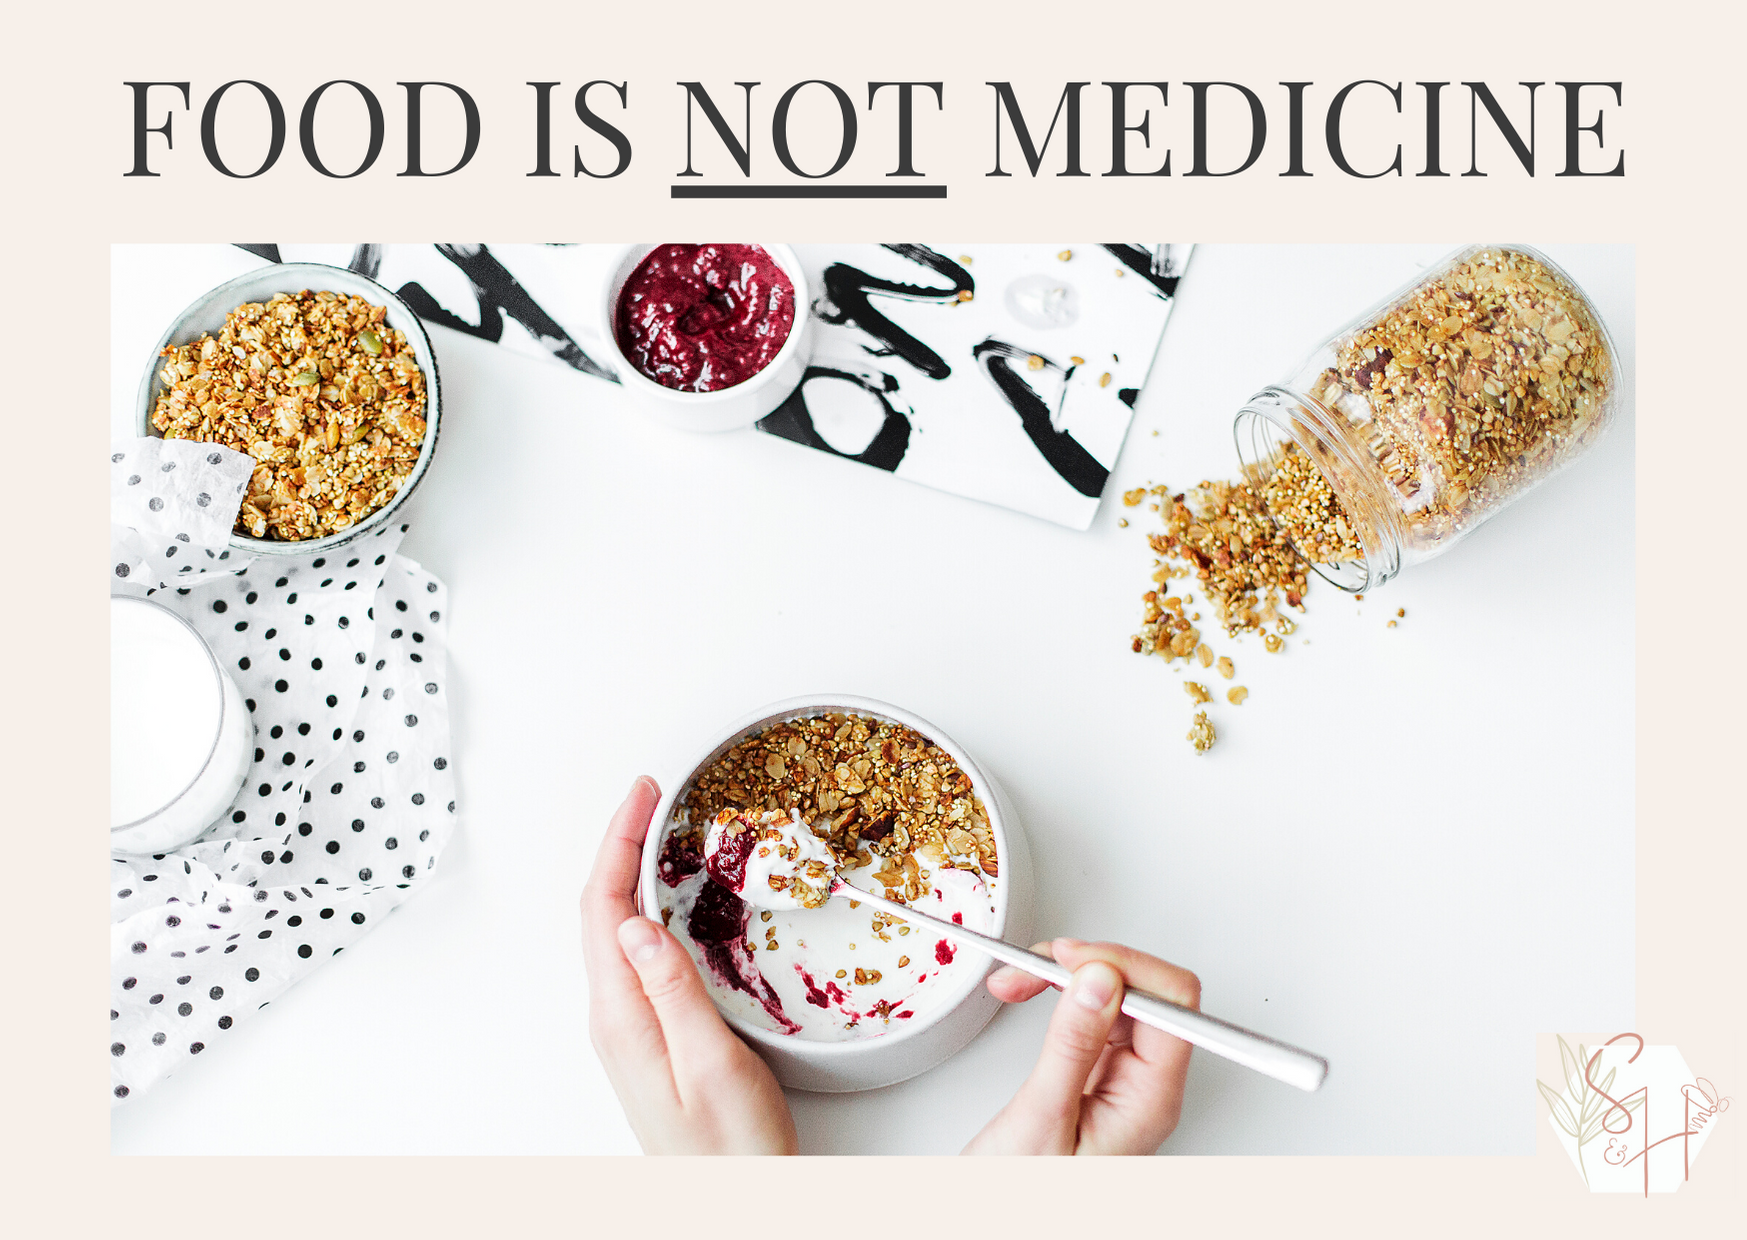 Food Is NOT Medicine | Why This Rhetoric Is Inaccurate & Harmful